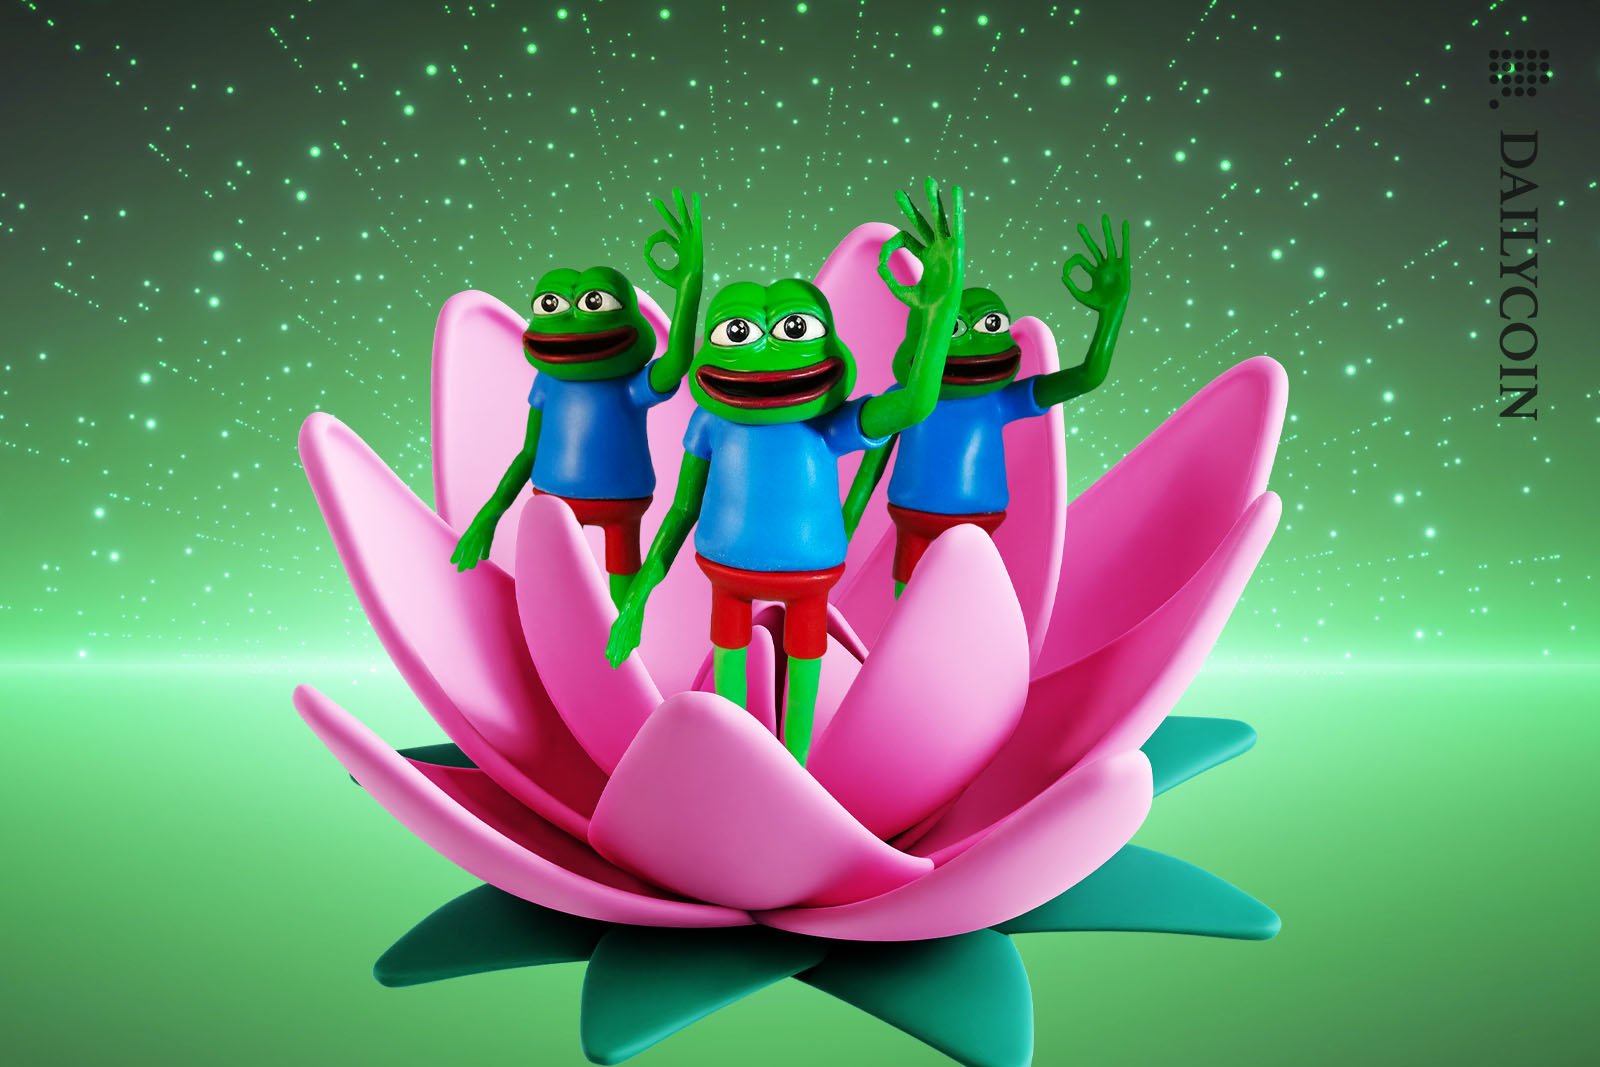 Three Pepes coming out of a lotus flower showing "perfect" hand sign.